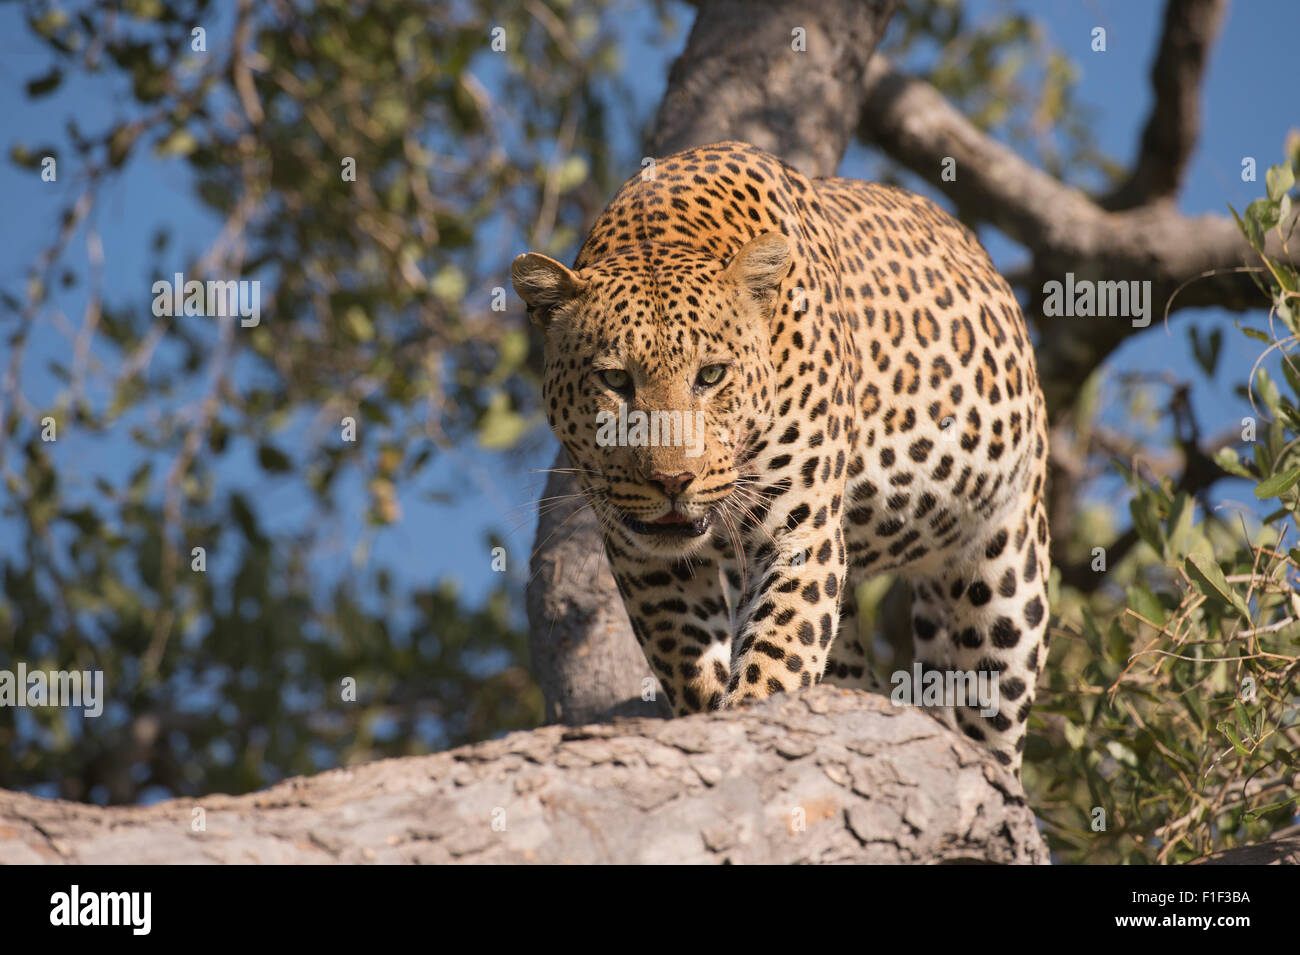 African male Leopard Panthera Pardus standing in tree, Stock Photo